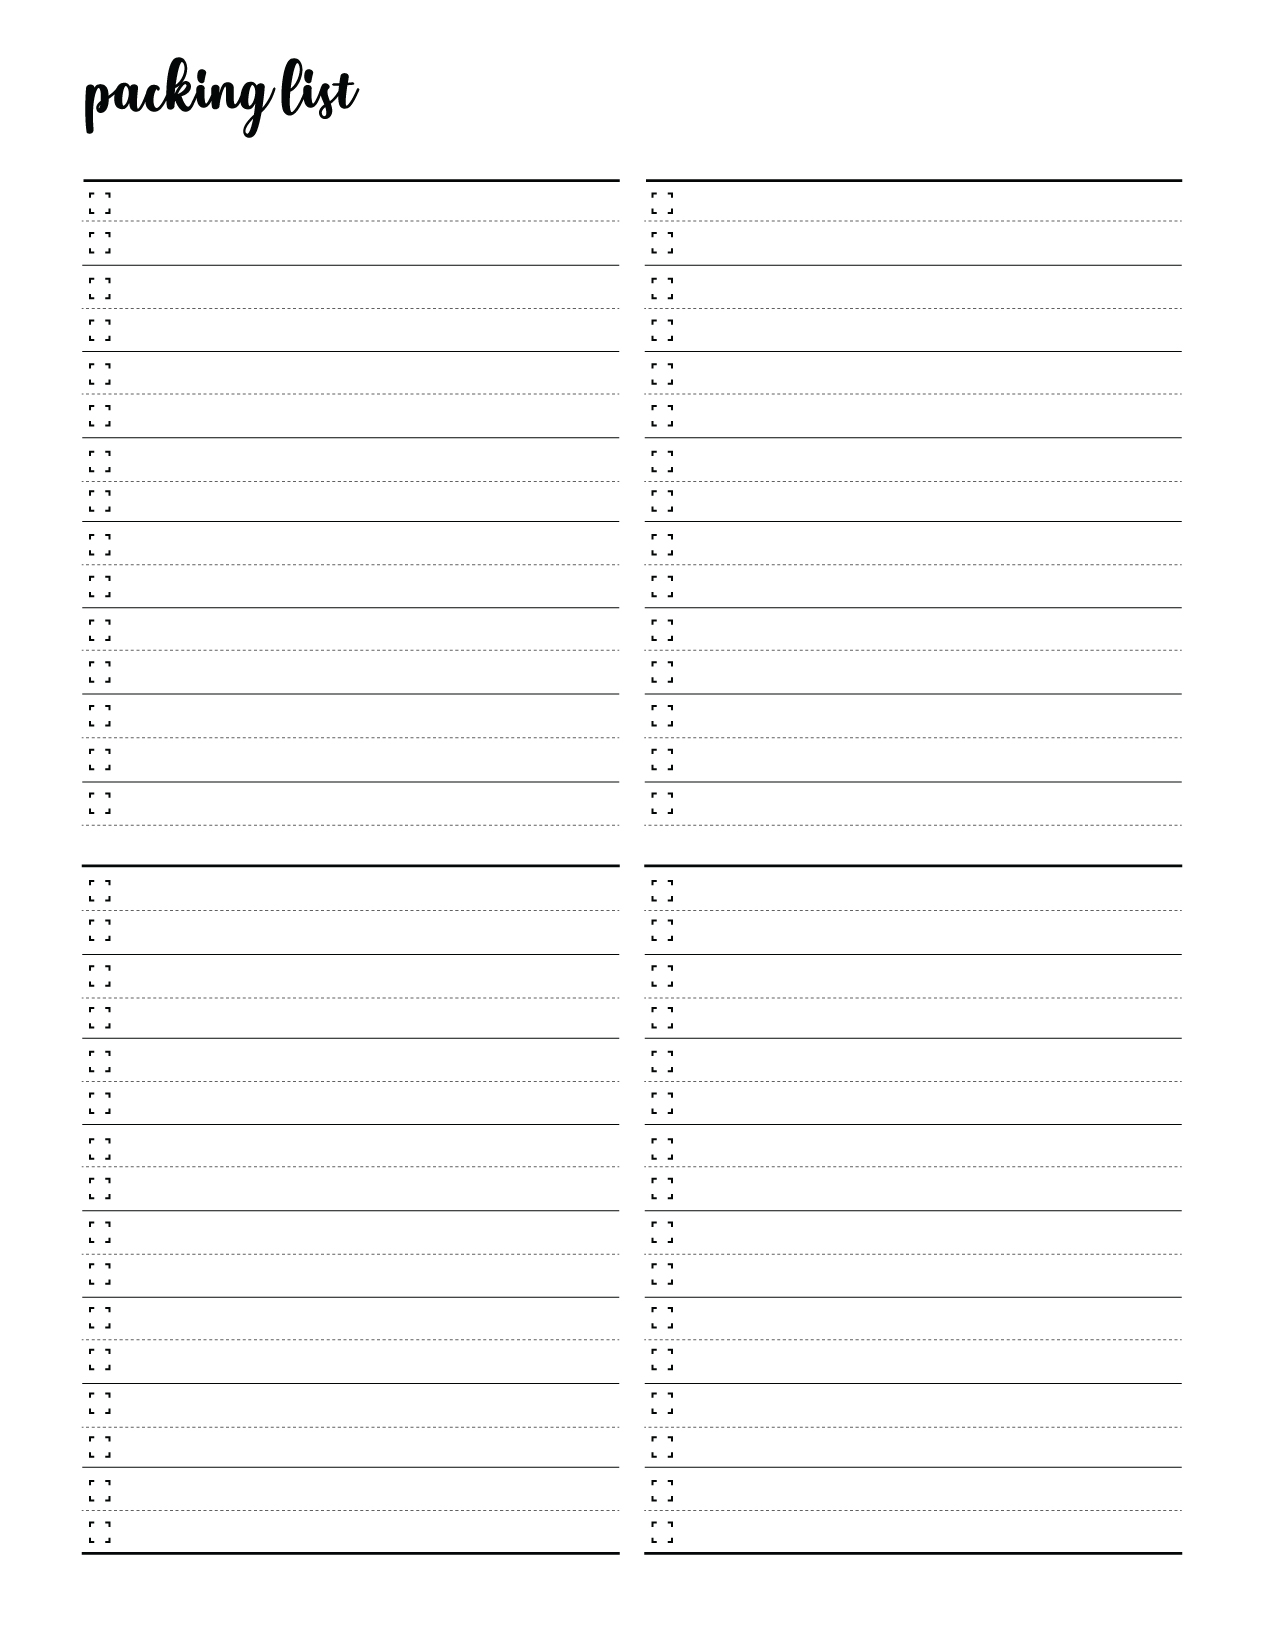 Printable Vacation Packing List - World of Printables Throughout Blank Packing List Template